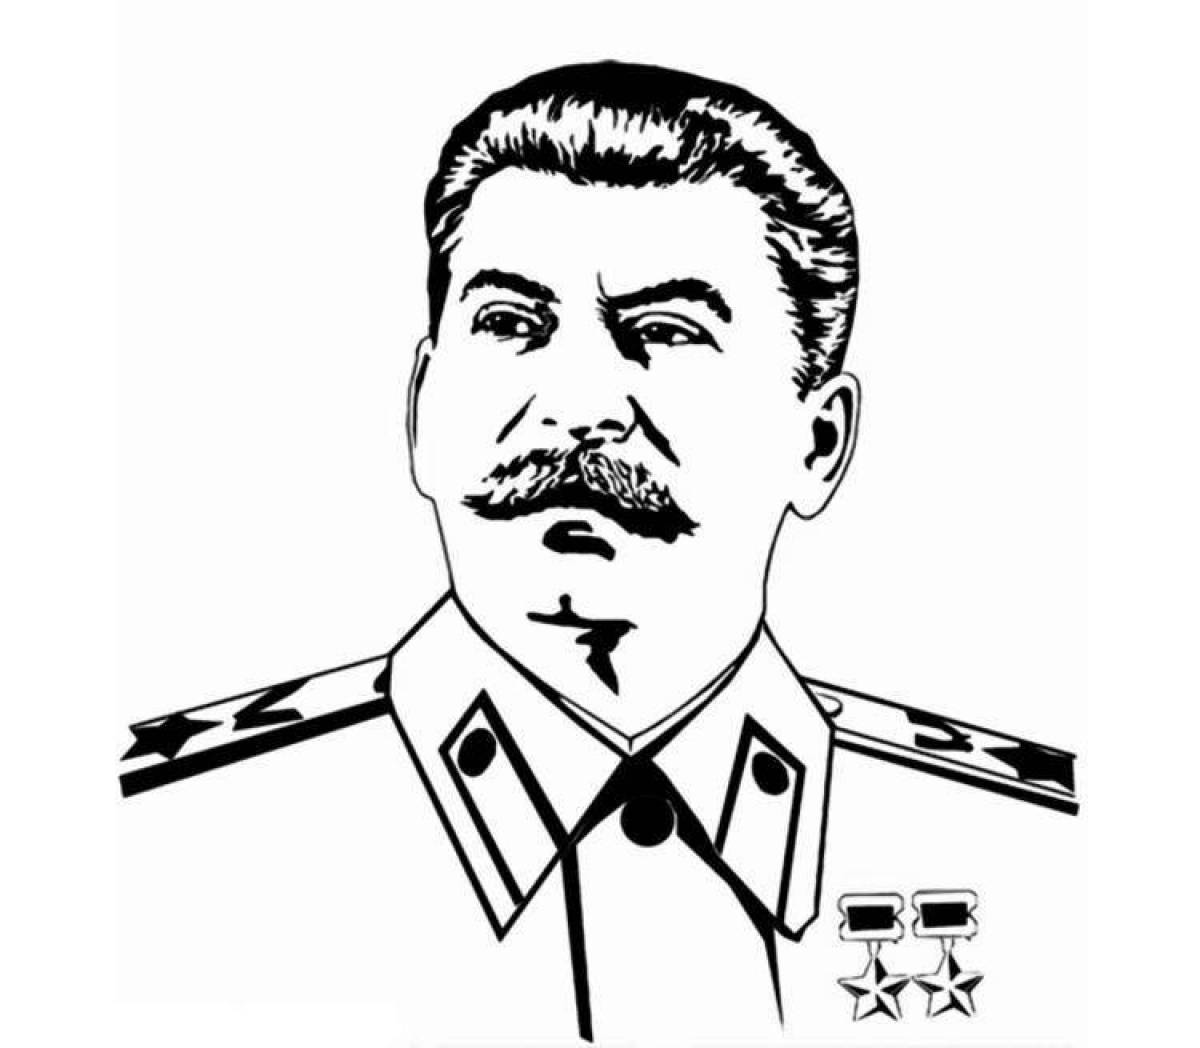 Stalin's fancy coloring